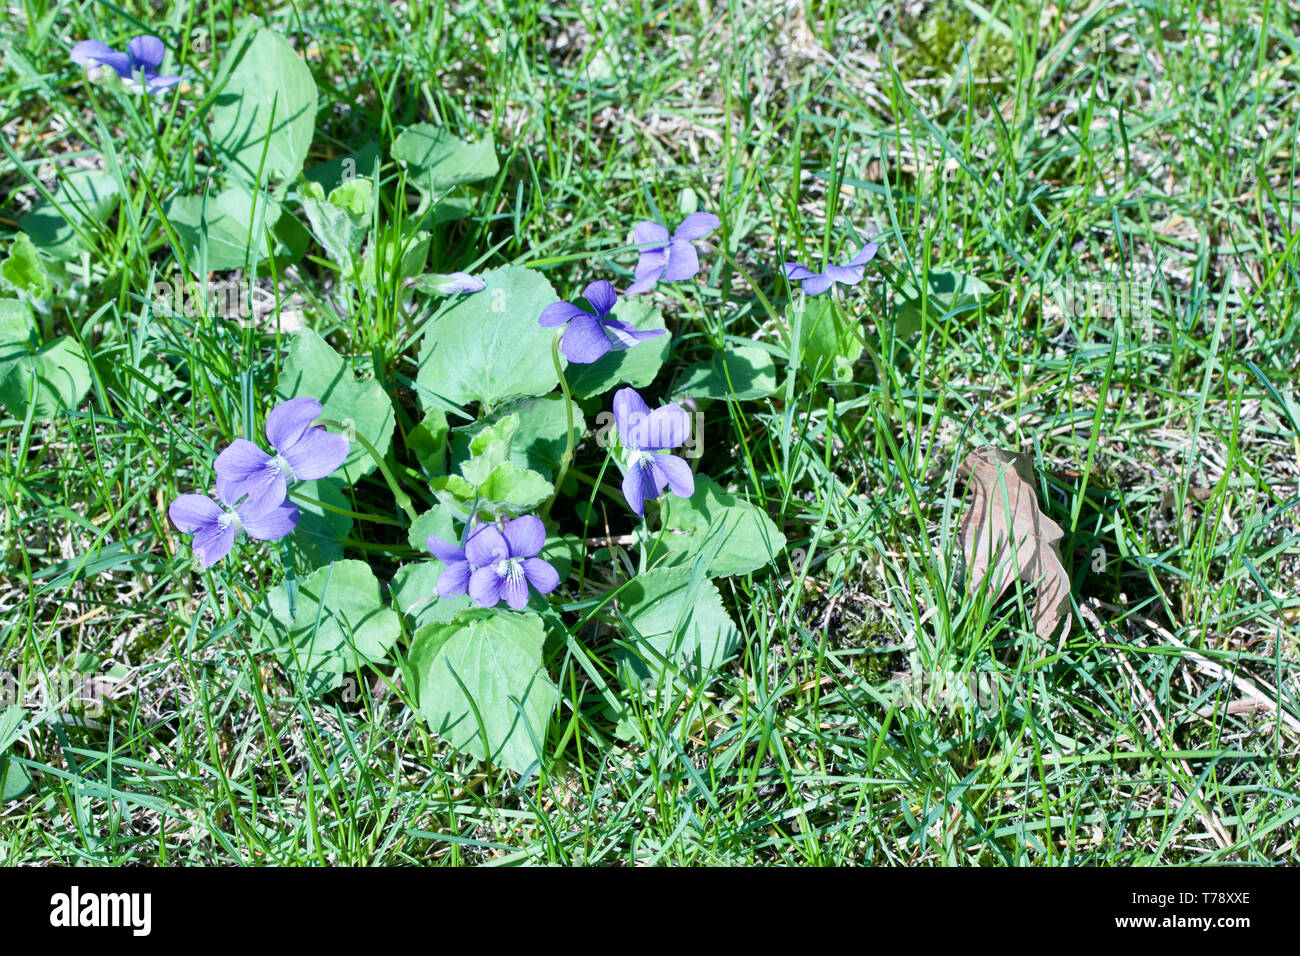 Close up view of common blue violet wildflowers (viola sororia) growing naturally in their uncultivated woodland prairie environment Stock Photo